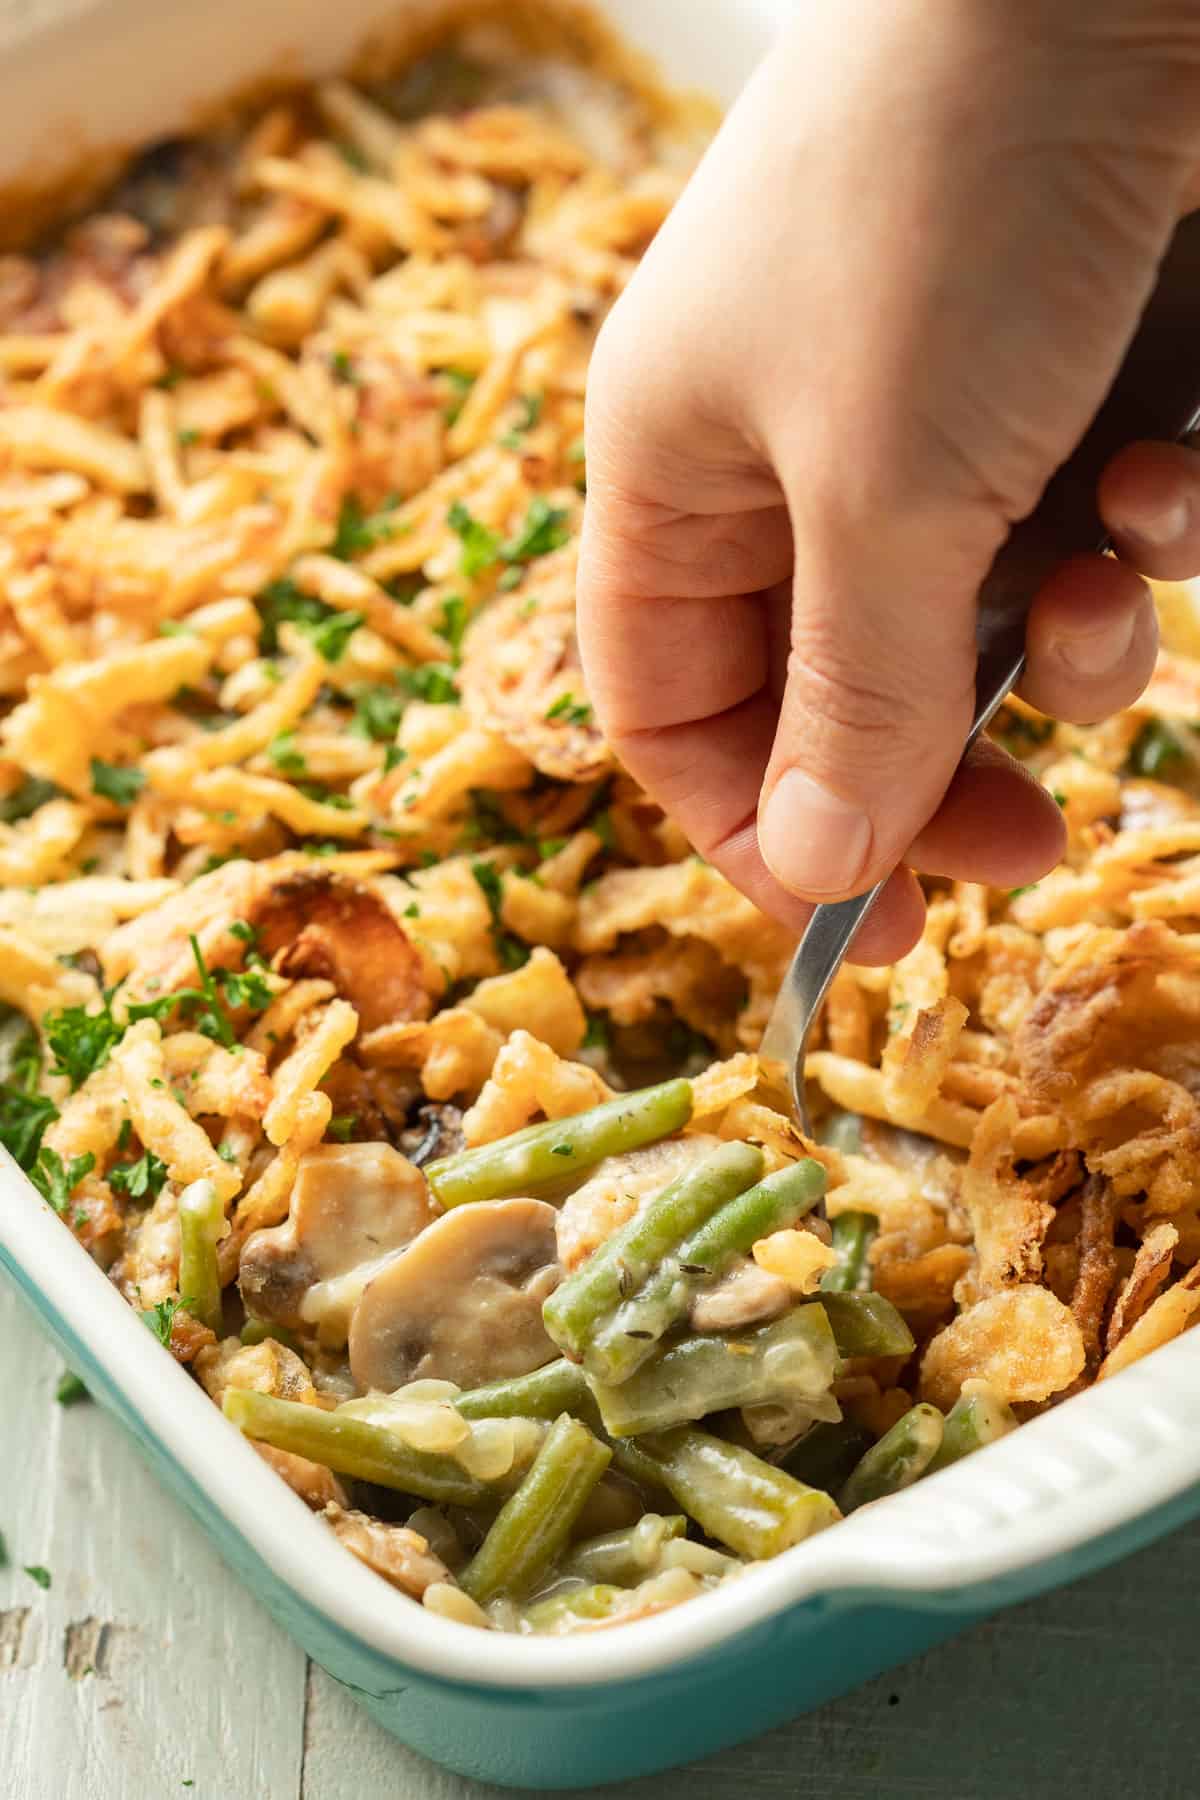 Hand with spoon scooping Vegan Green Bean Casserole from a serving dish.